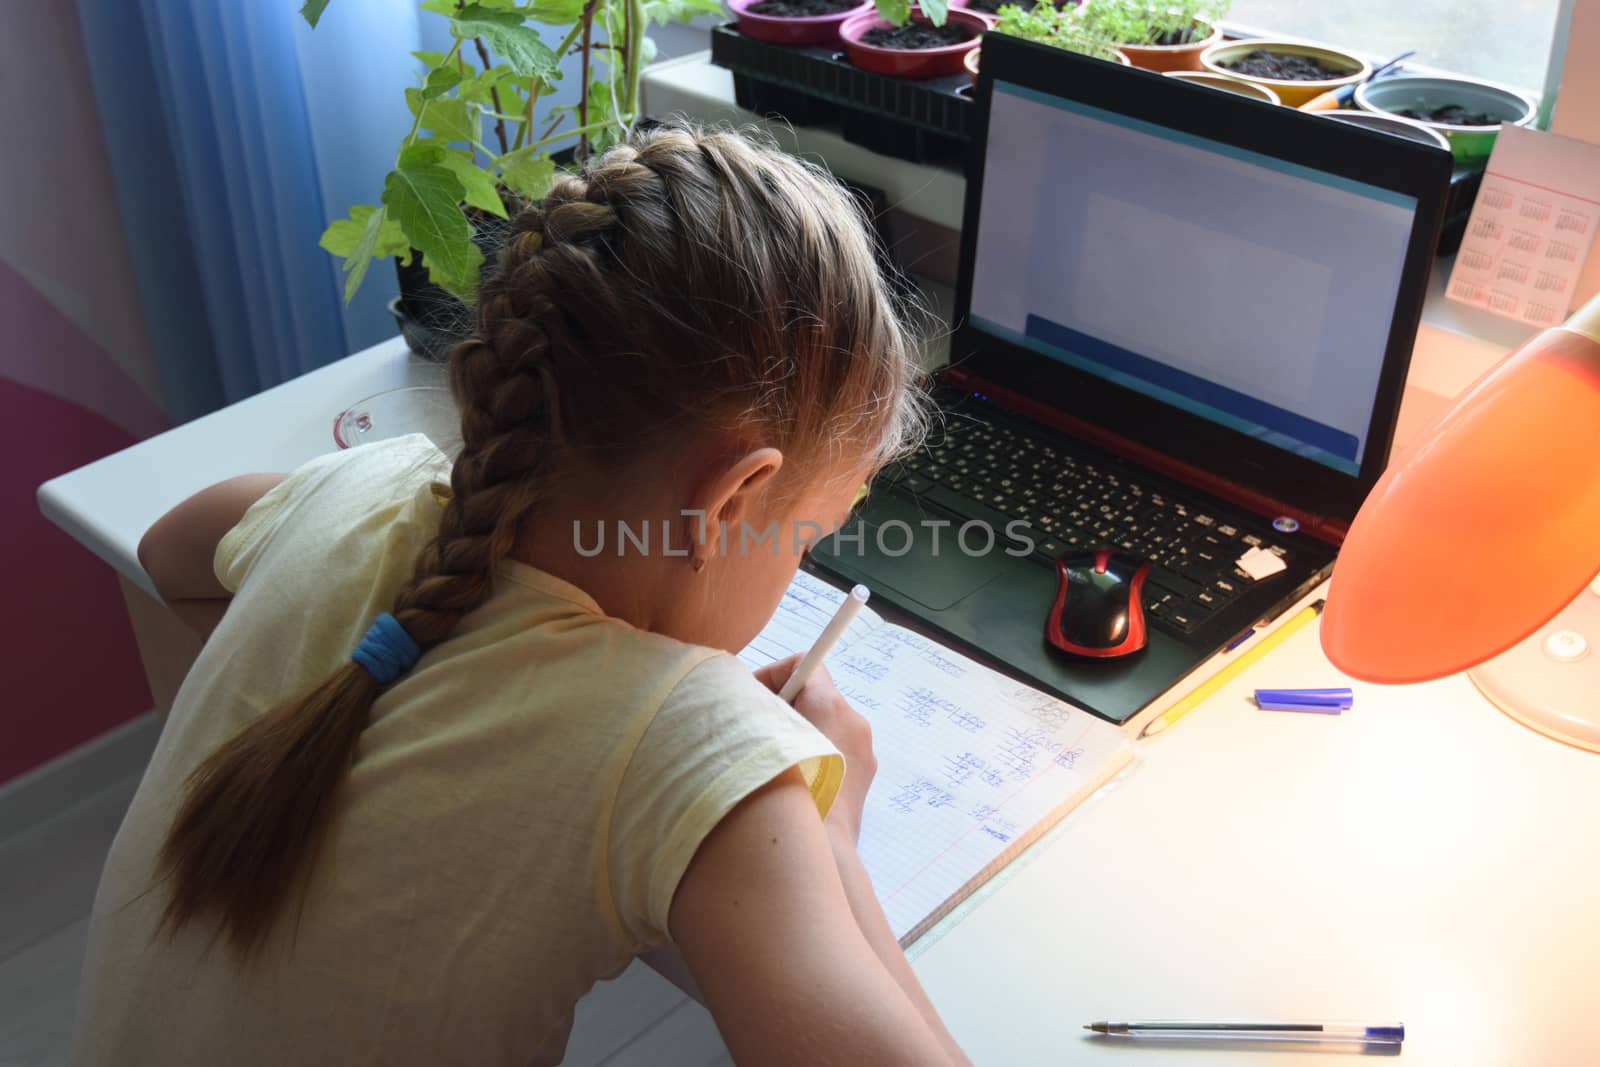 Girl solves math examples in notebook in front of laptop by Madhourse